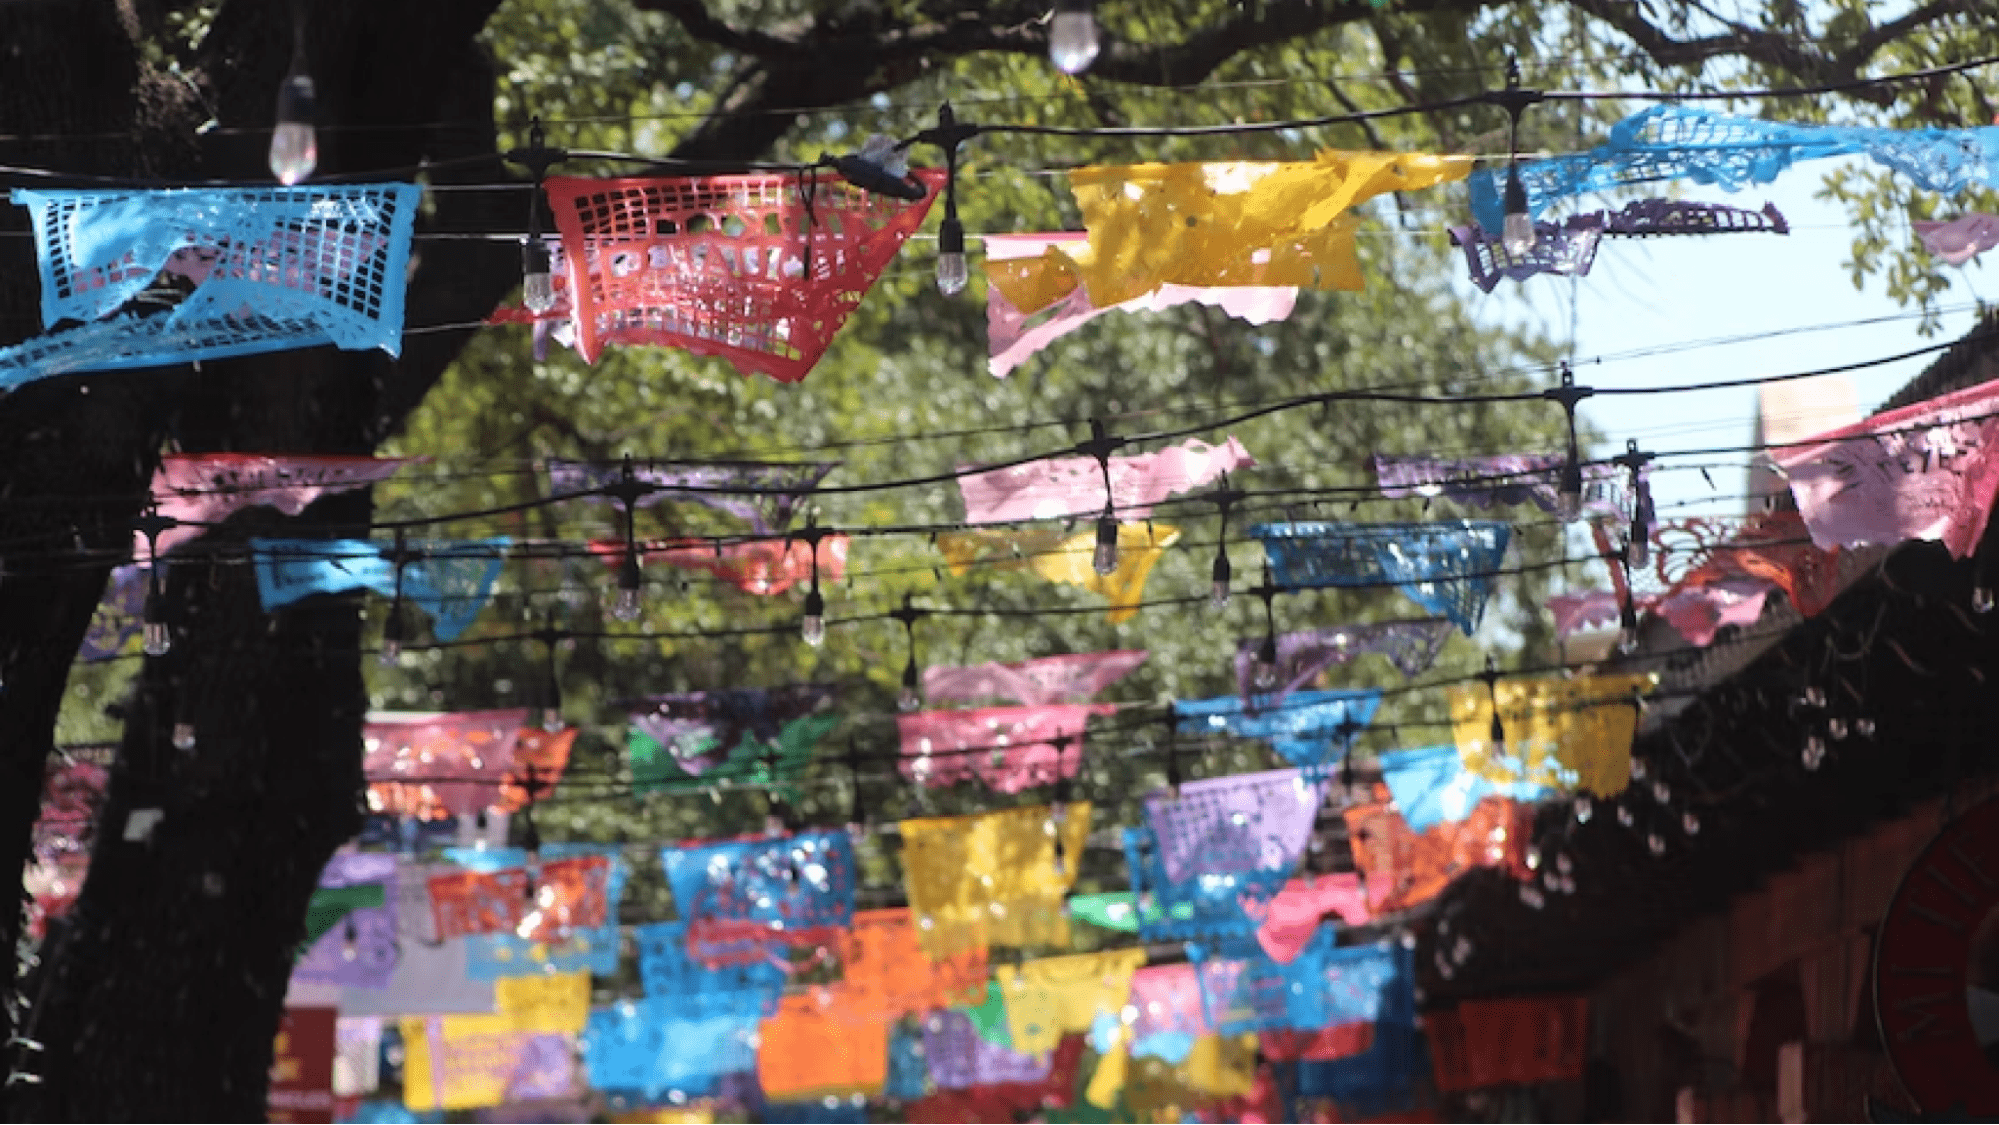 Mexican bunting and string lights in trees